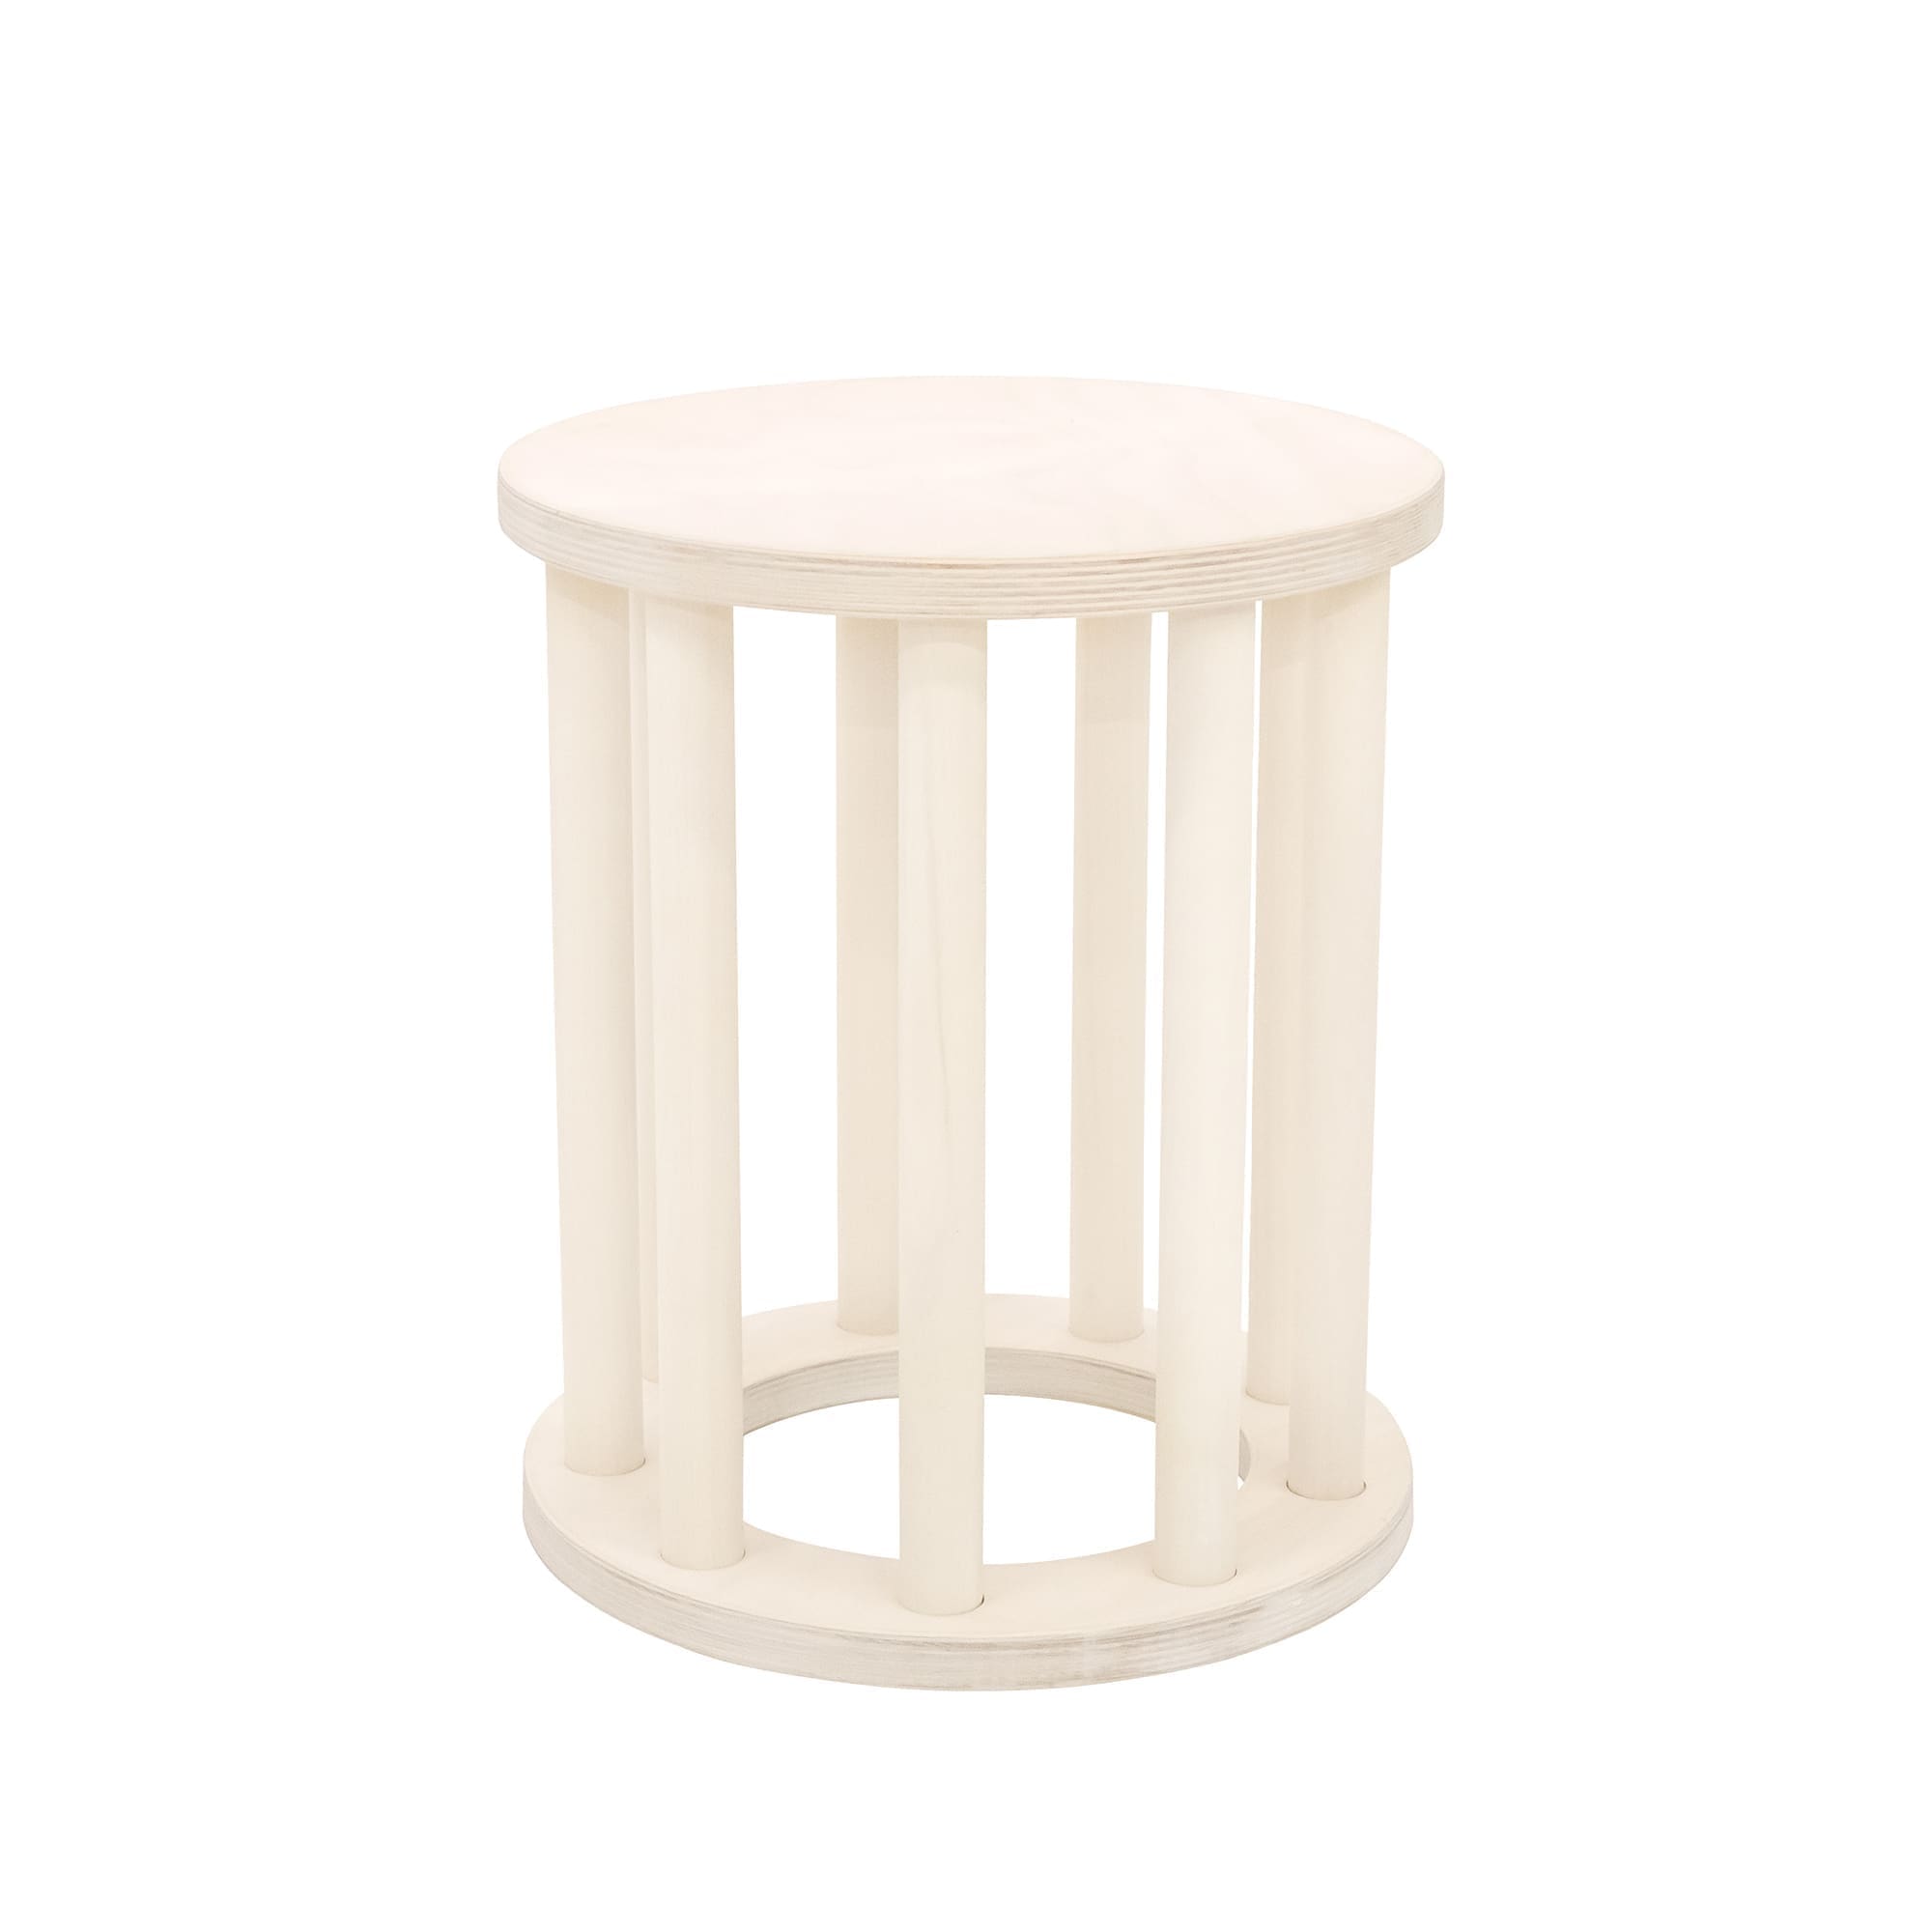 LUOTO multifunctional stool in birch color